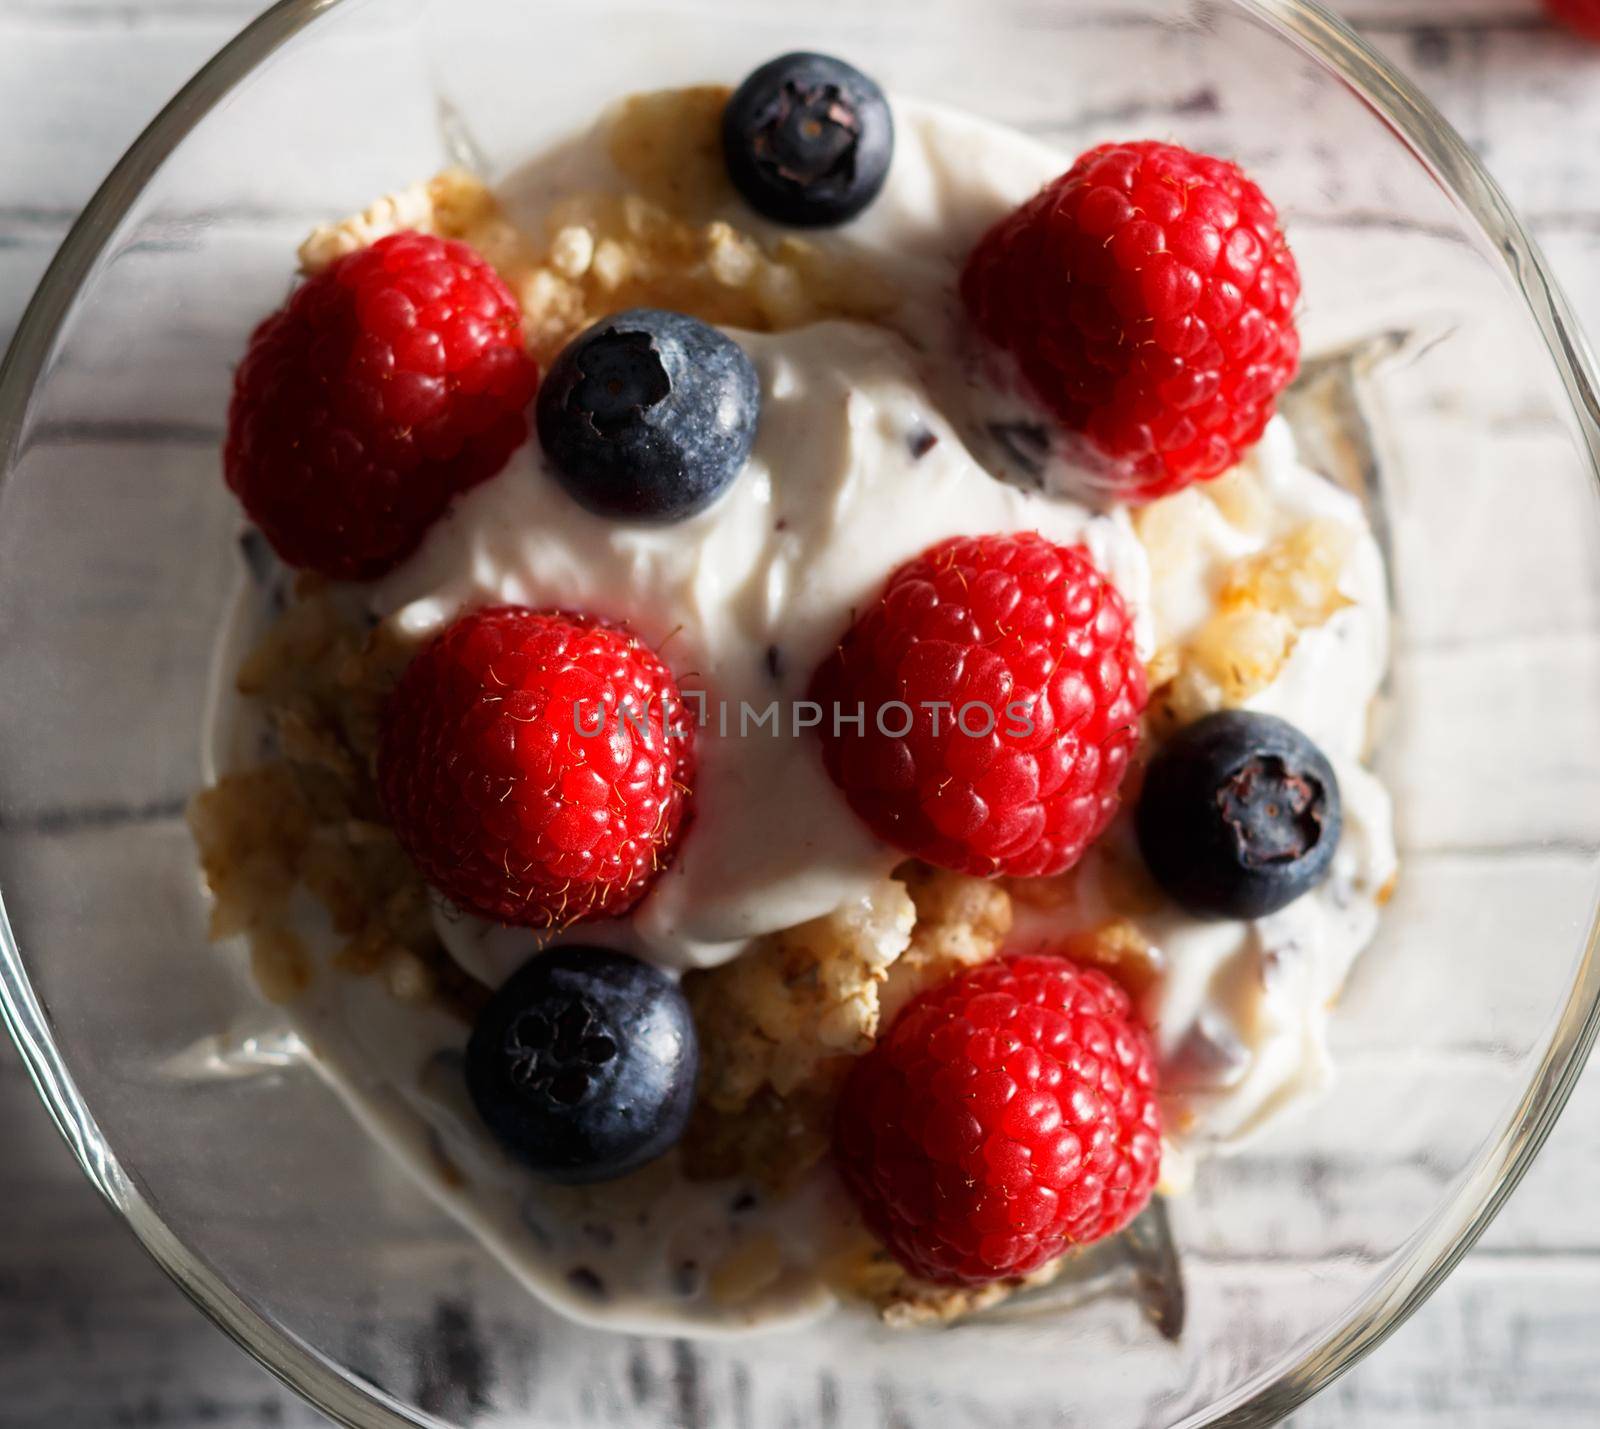 Raspberries, blueberries, cereals and yogurt in a glass bowl on wooden slats. Healthy breakfast for a healthy life. Square image view from above. Close up.